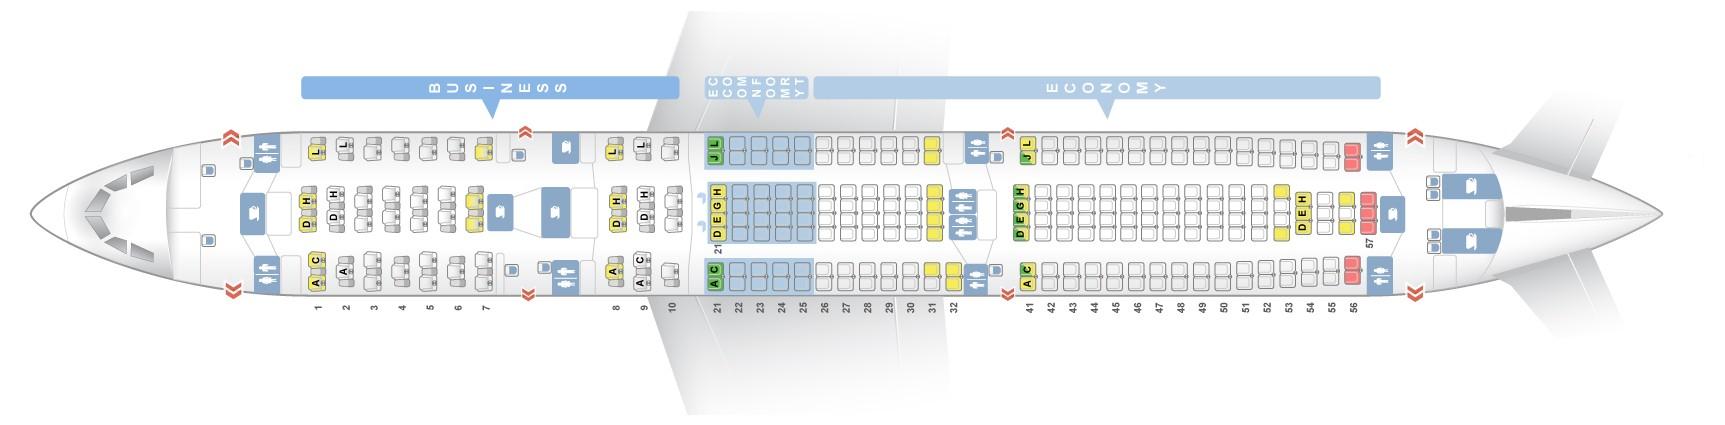 Seat Map Airbus A330 300 Finnair Best Seats In The Plane Hot Sex Picture